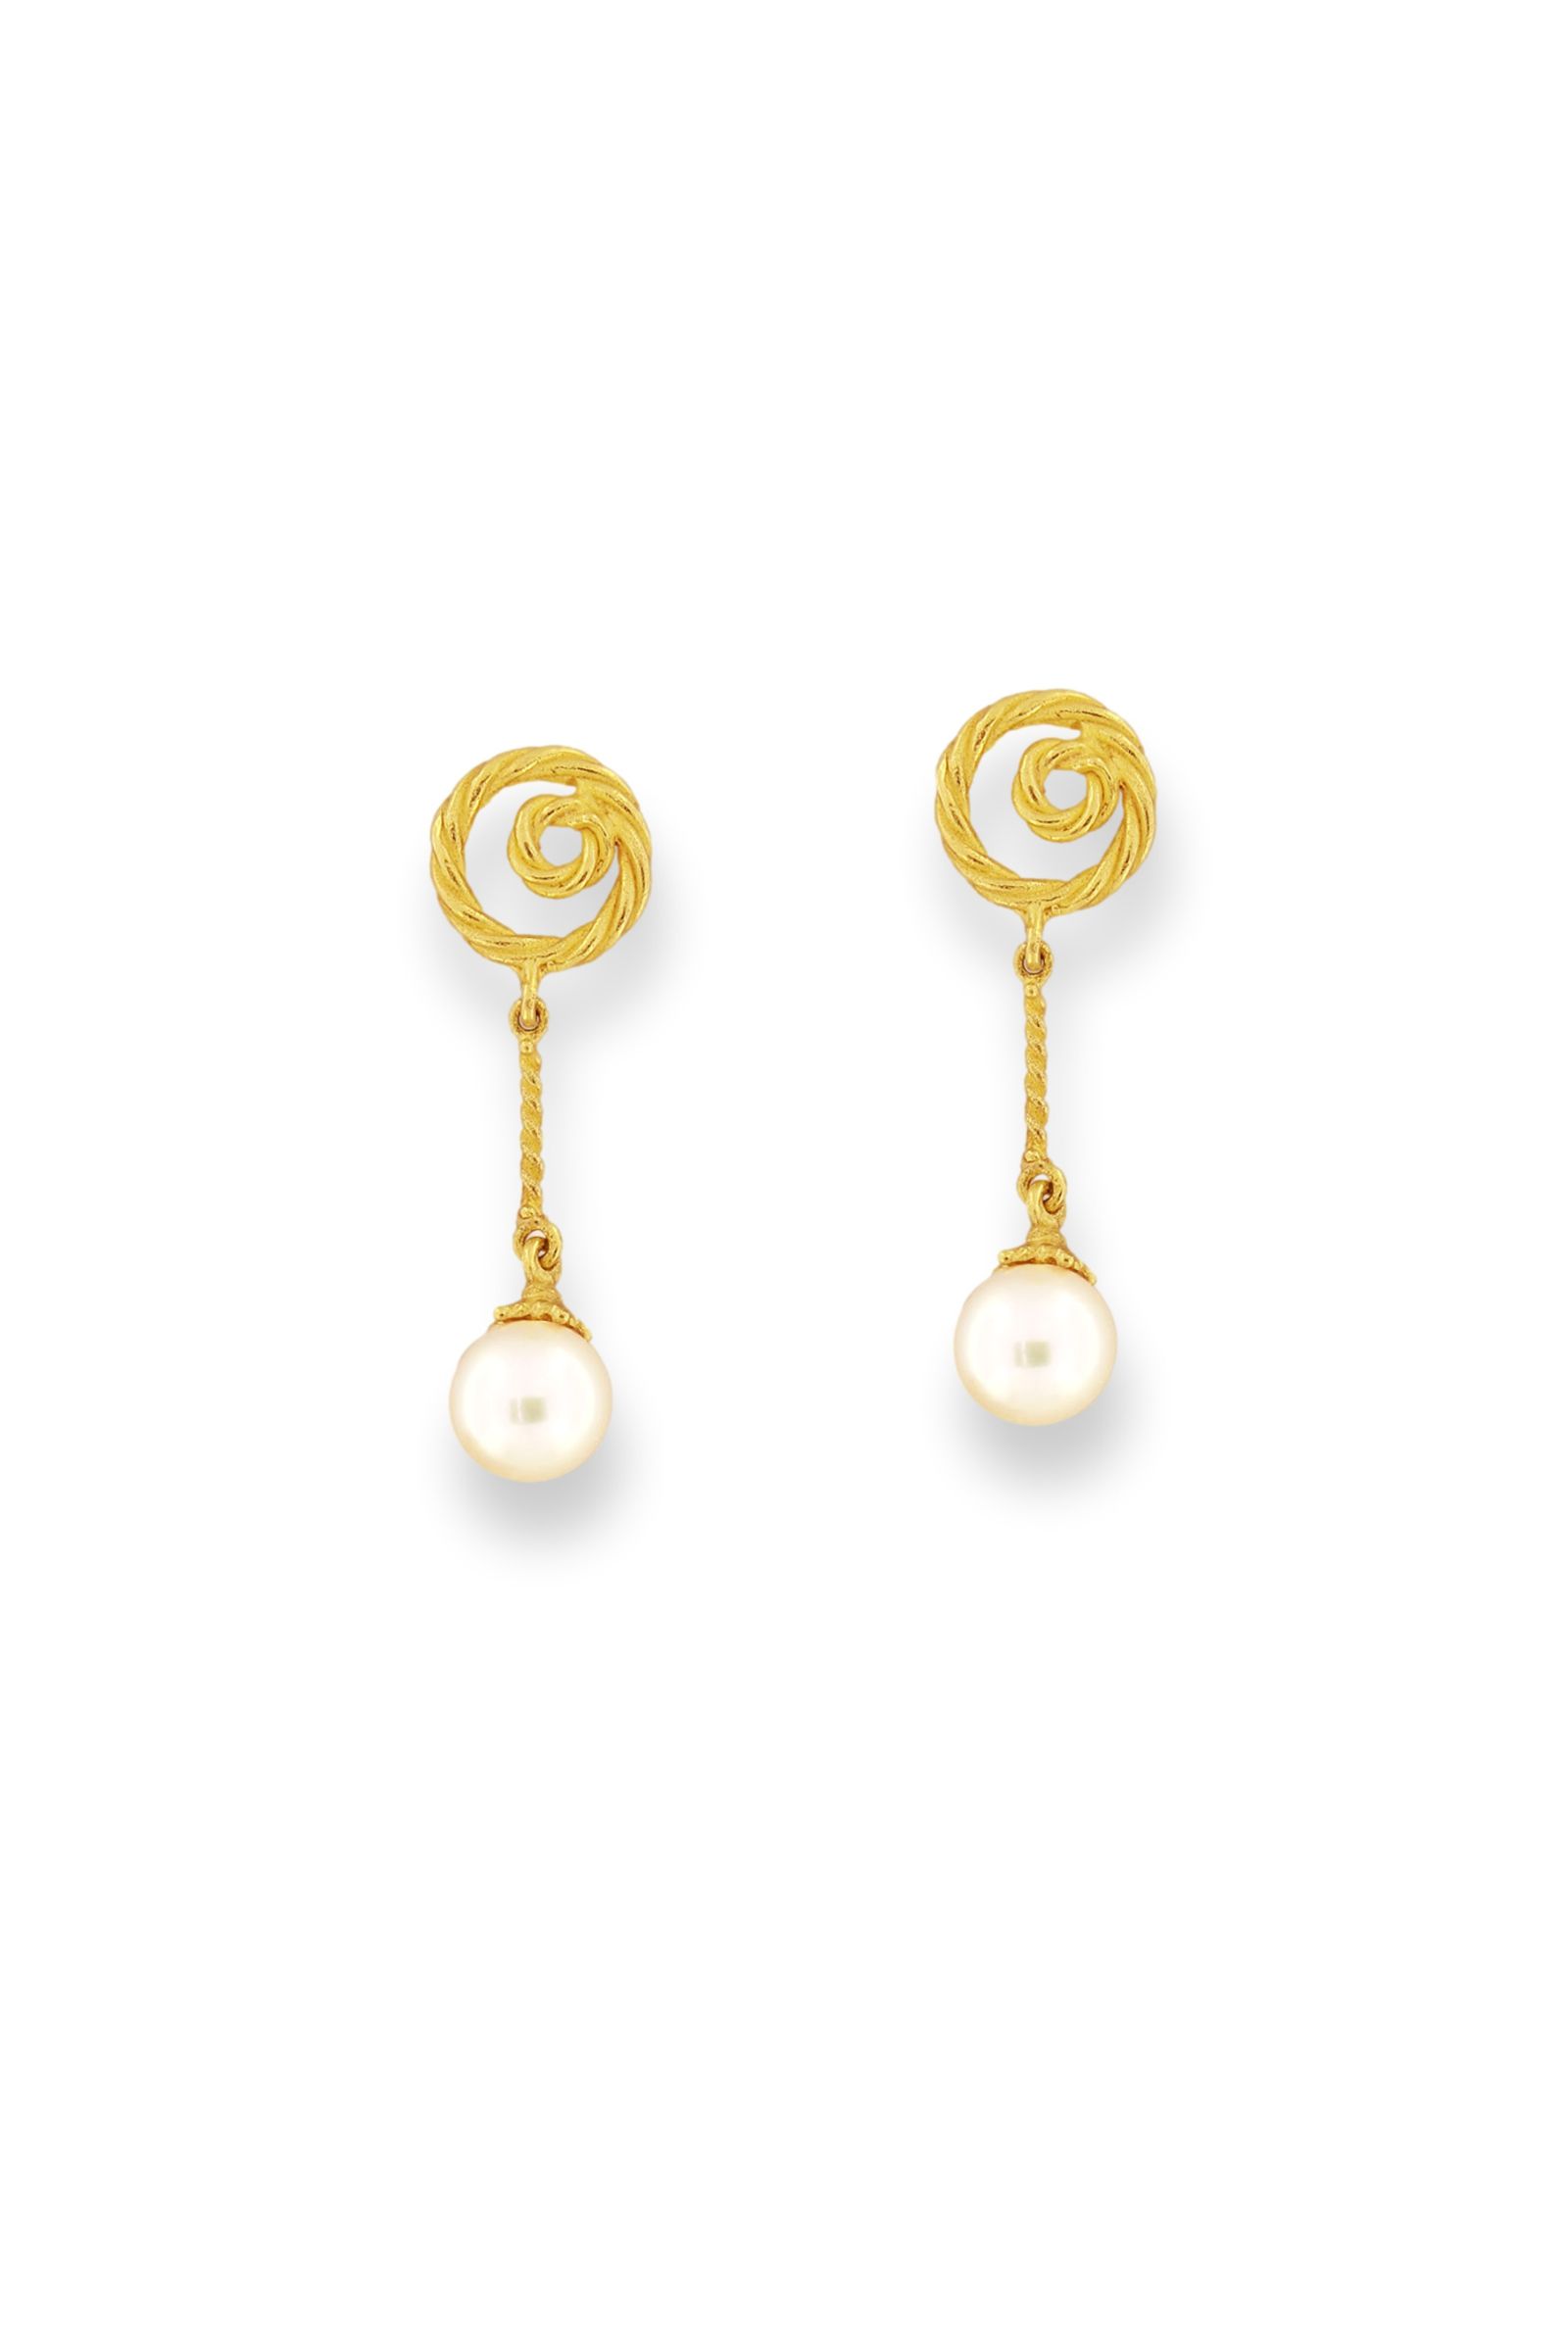 SD274A-18-Kt-Yellow-Gold-Pendant-Earrings-with-White-Pearls-1_